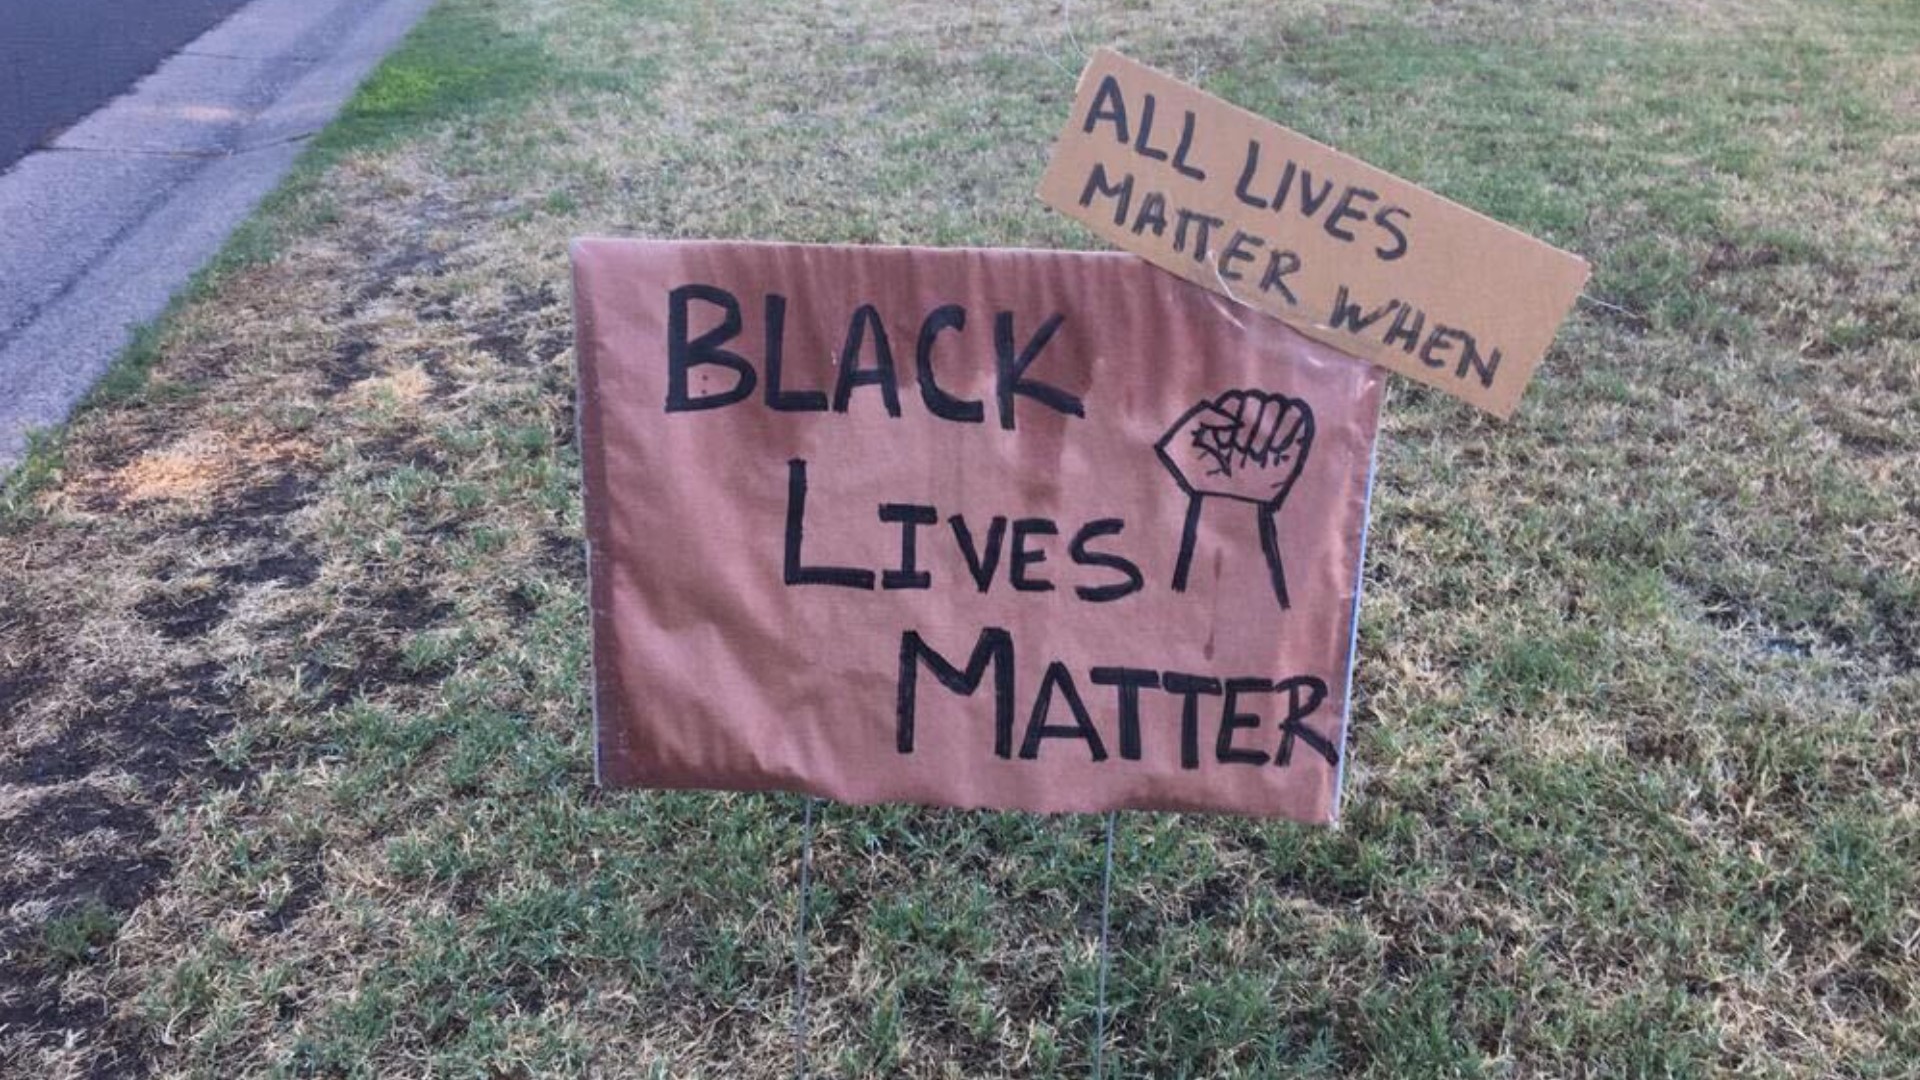 A Sacramento mother's sign showing the phrase "Black Lives Matter" was defaced with an "All Lives Matter" sign.